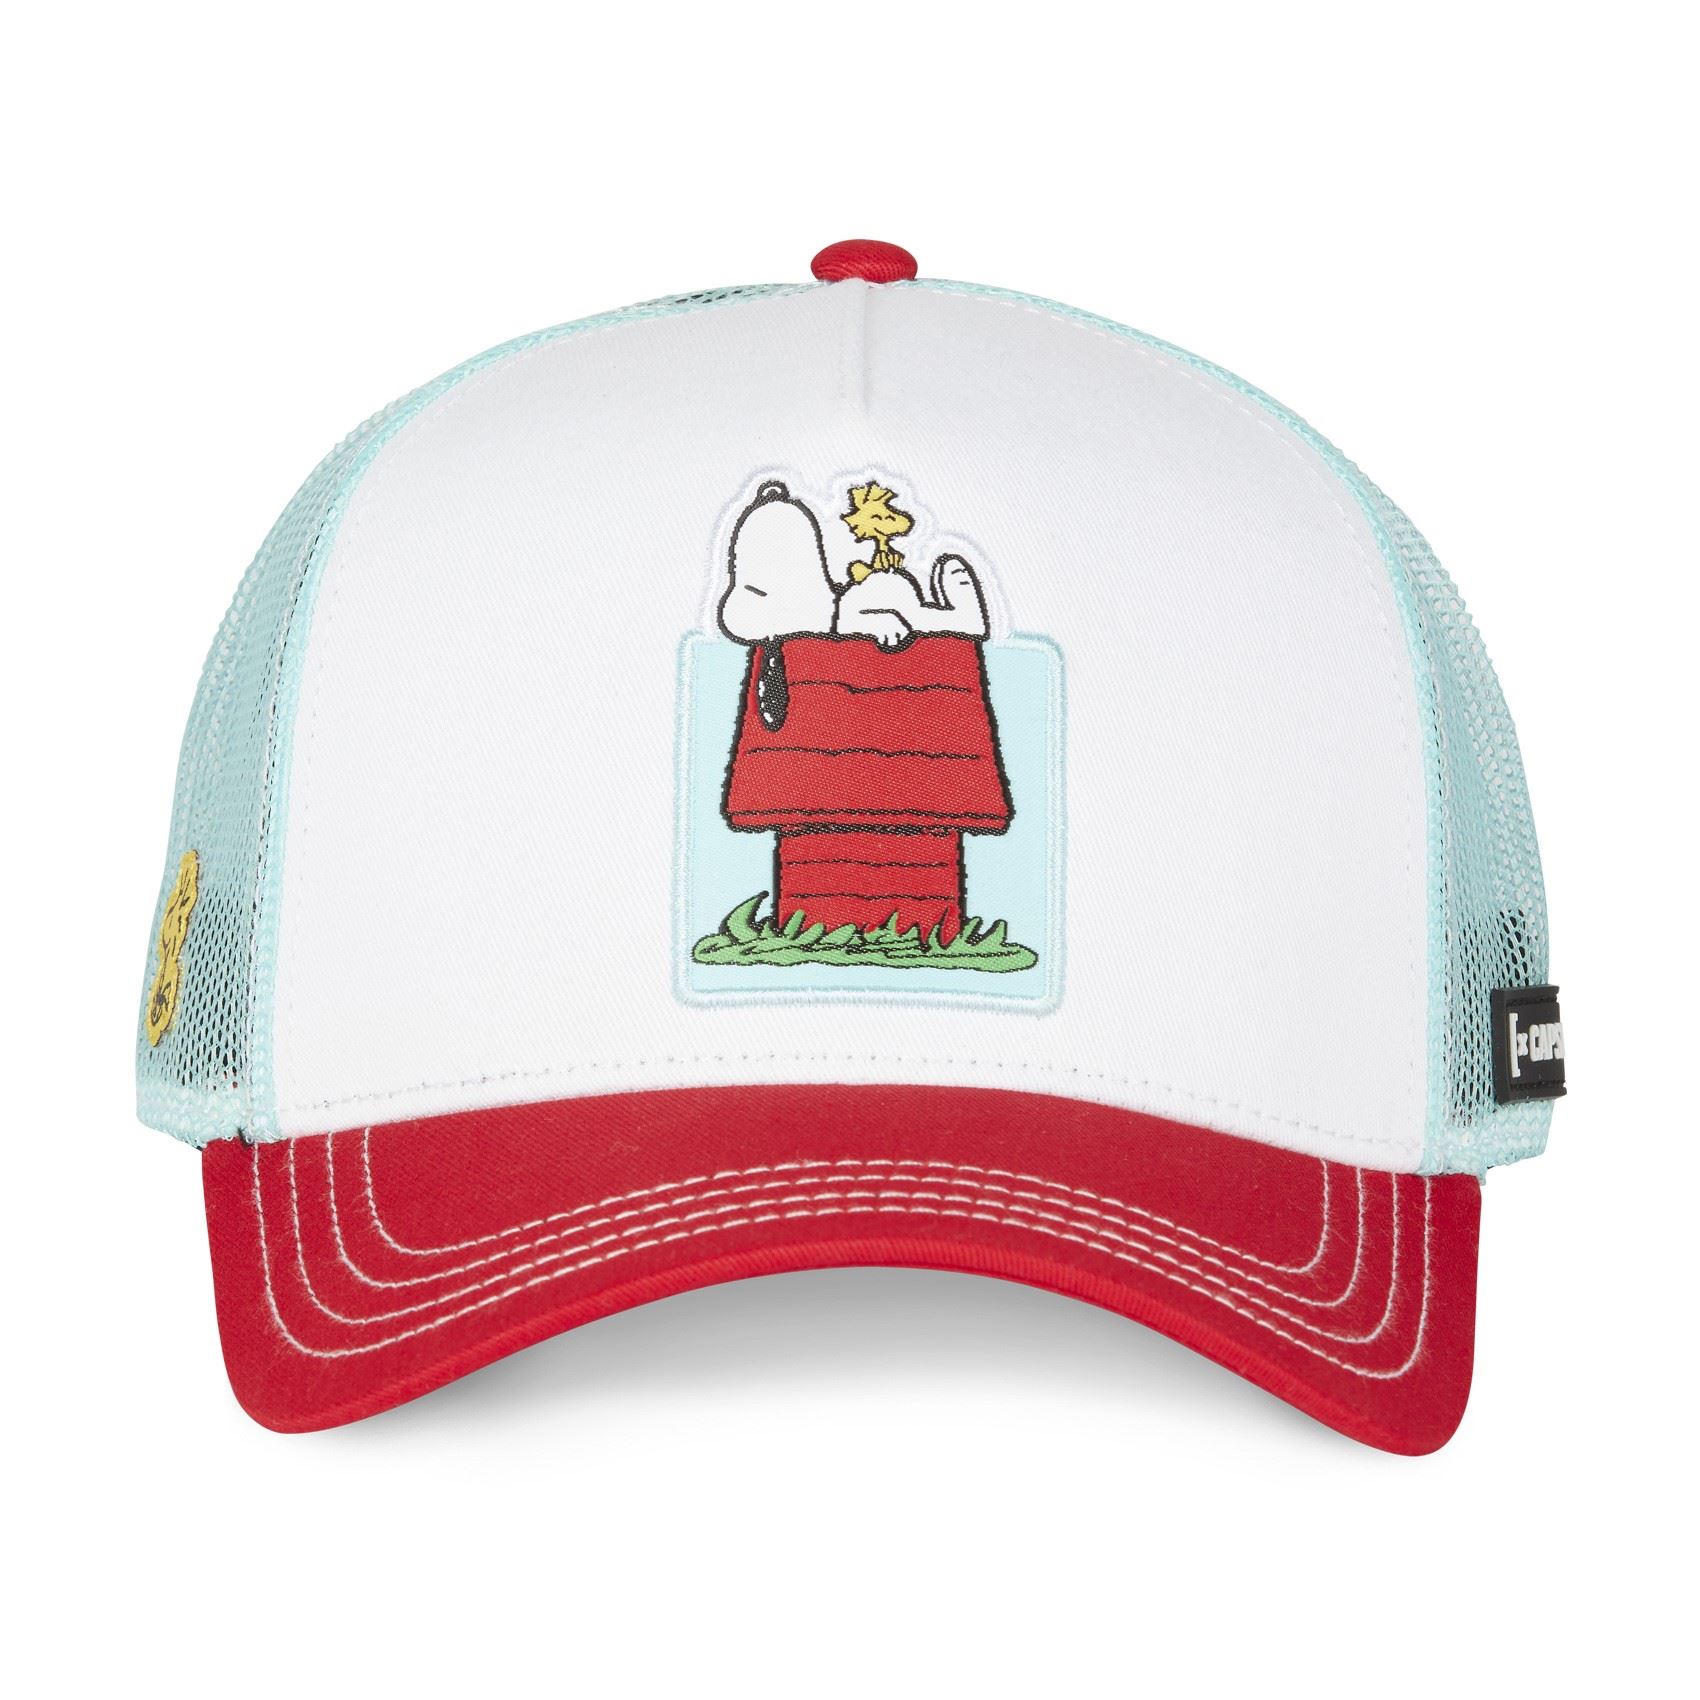 Snoopy The Peanuts White Red Trucker Cap Capslab